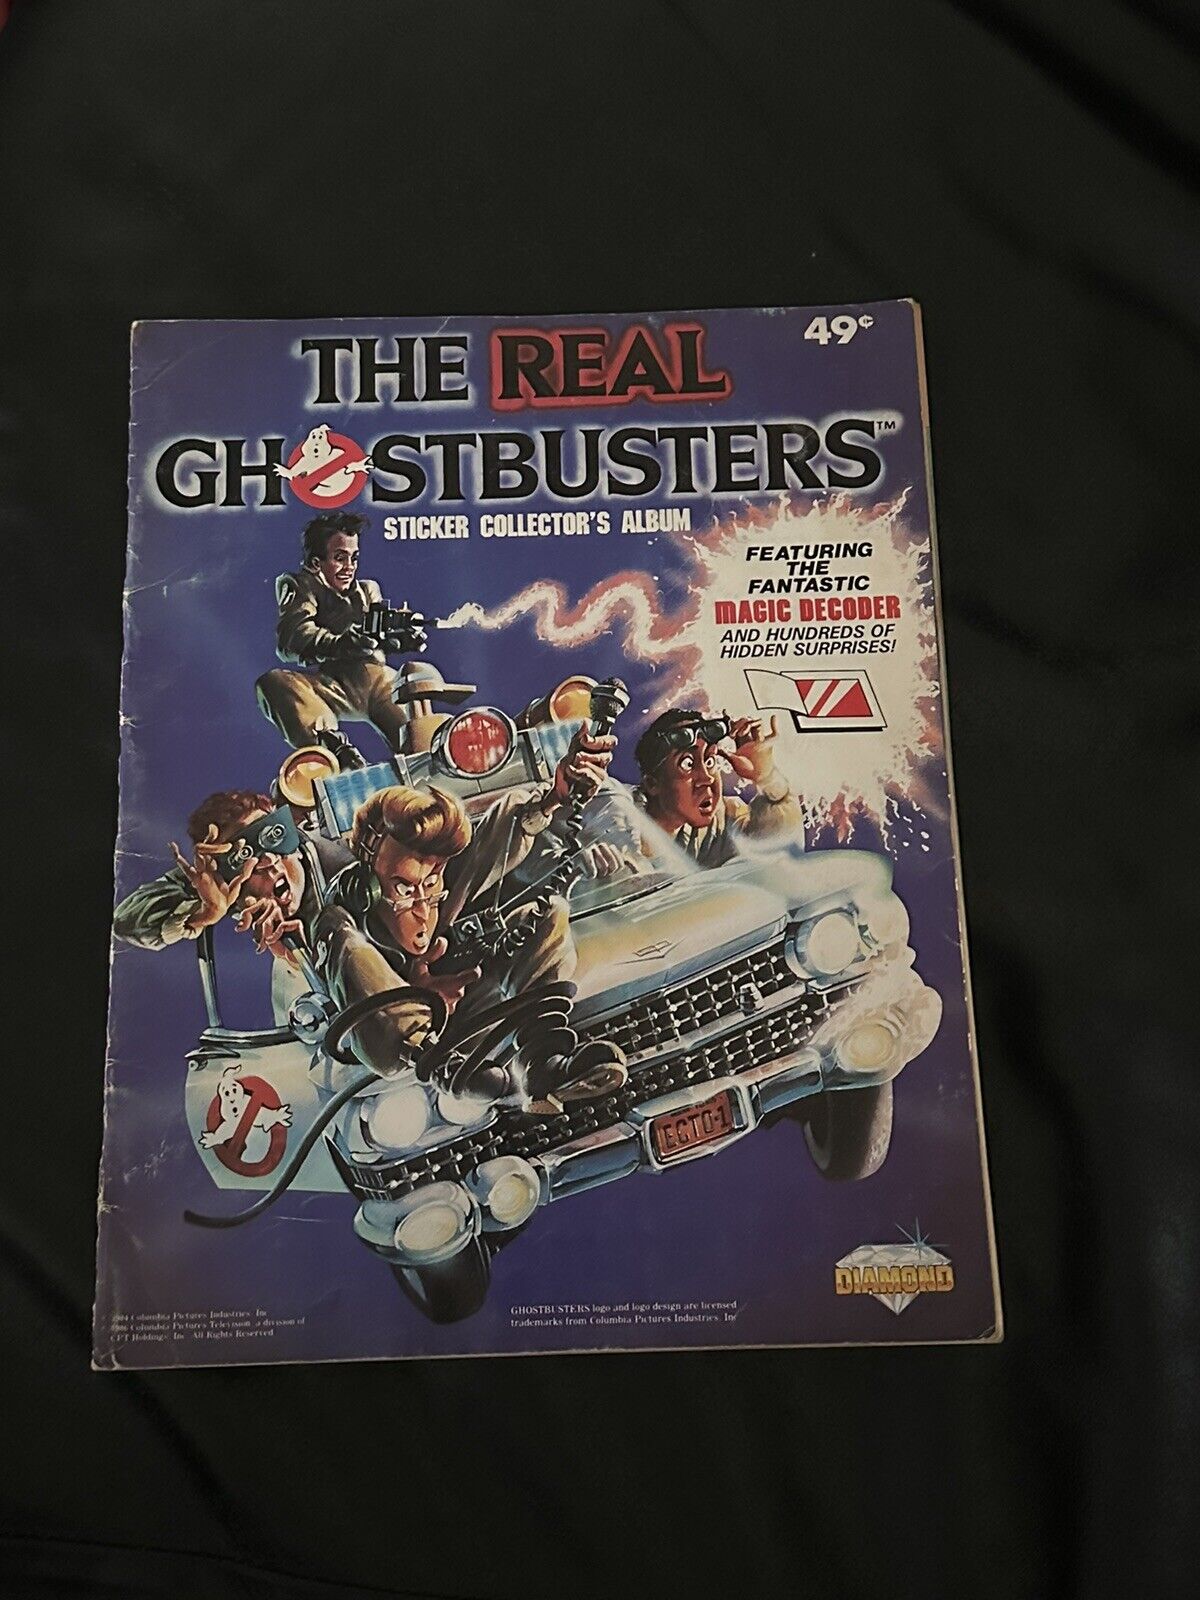 VINTAGE THE REAL GHOSTBUSTERS STICKER ALBUM 